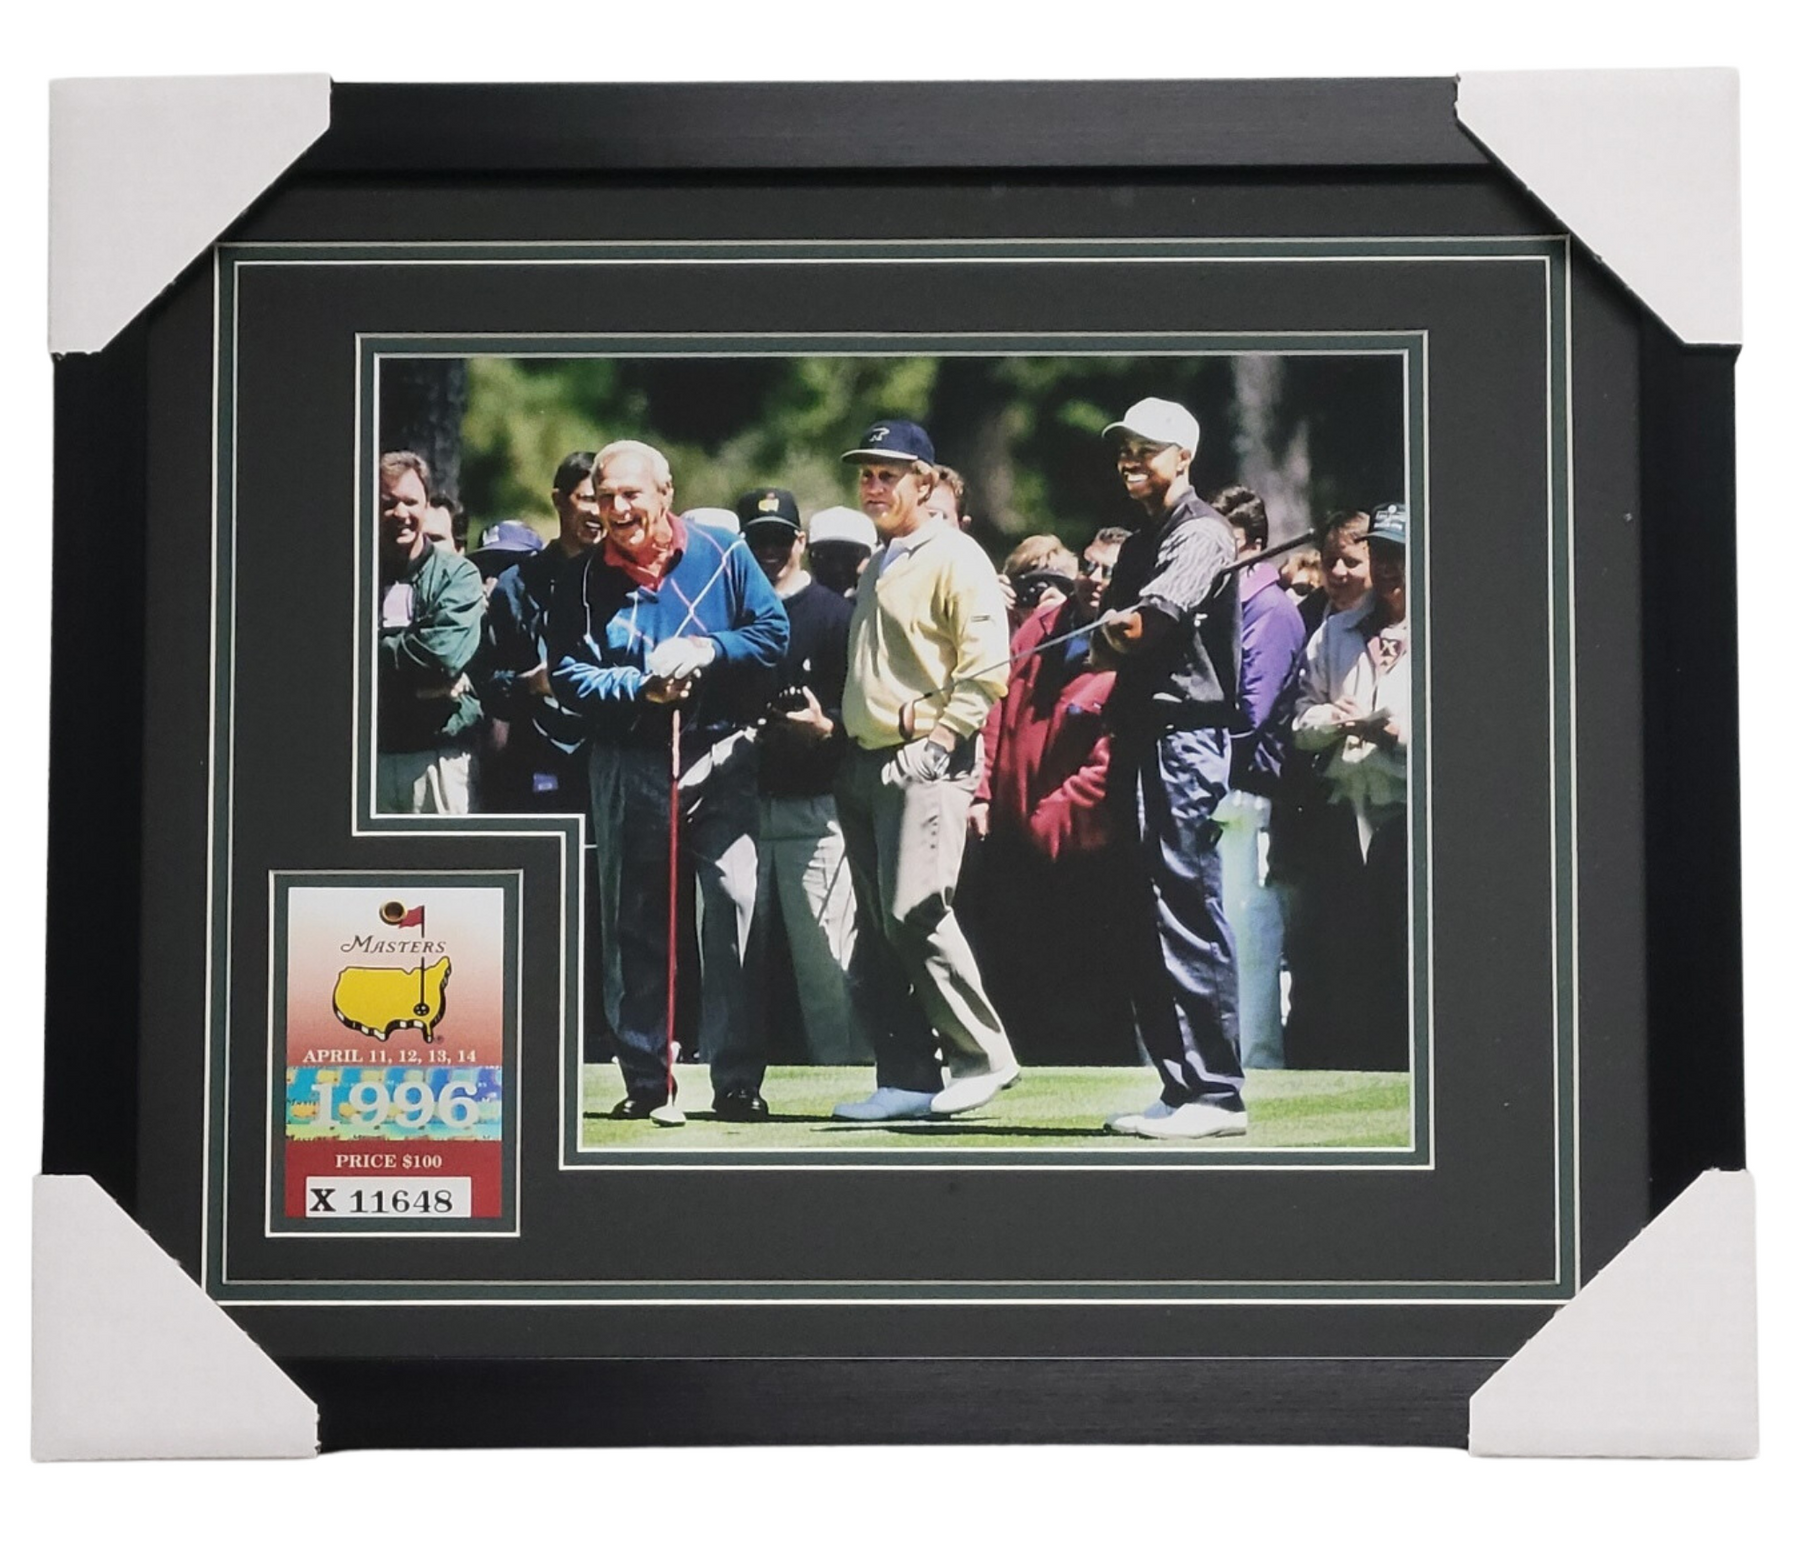 Arnold Palmer, Jack Nicklaus & Tiger Woods 1996 Masters Professionally Framed 11x14 Replica Ticket Display